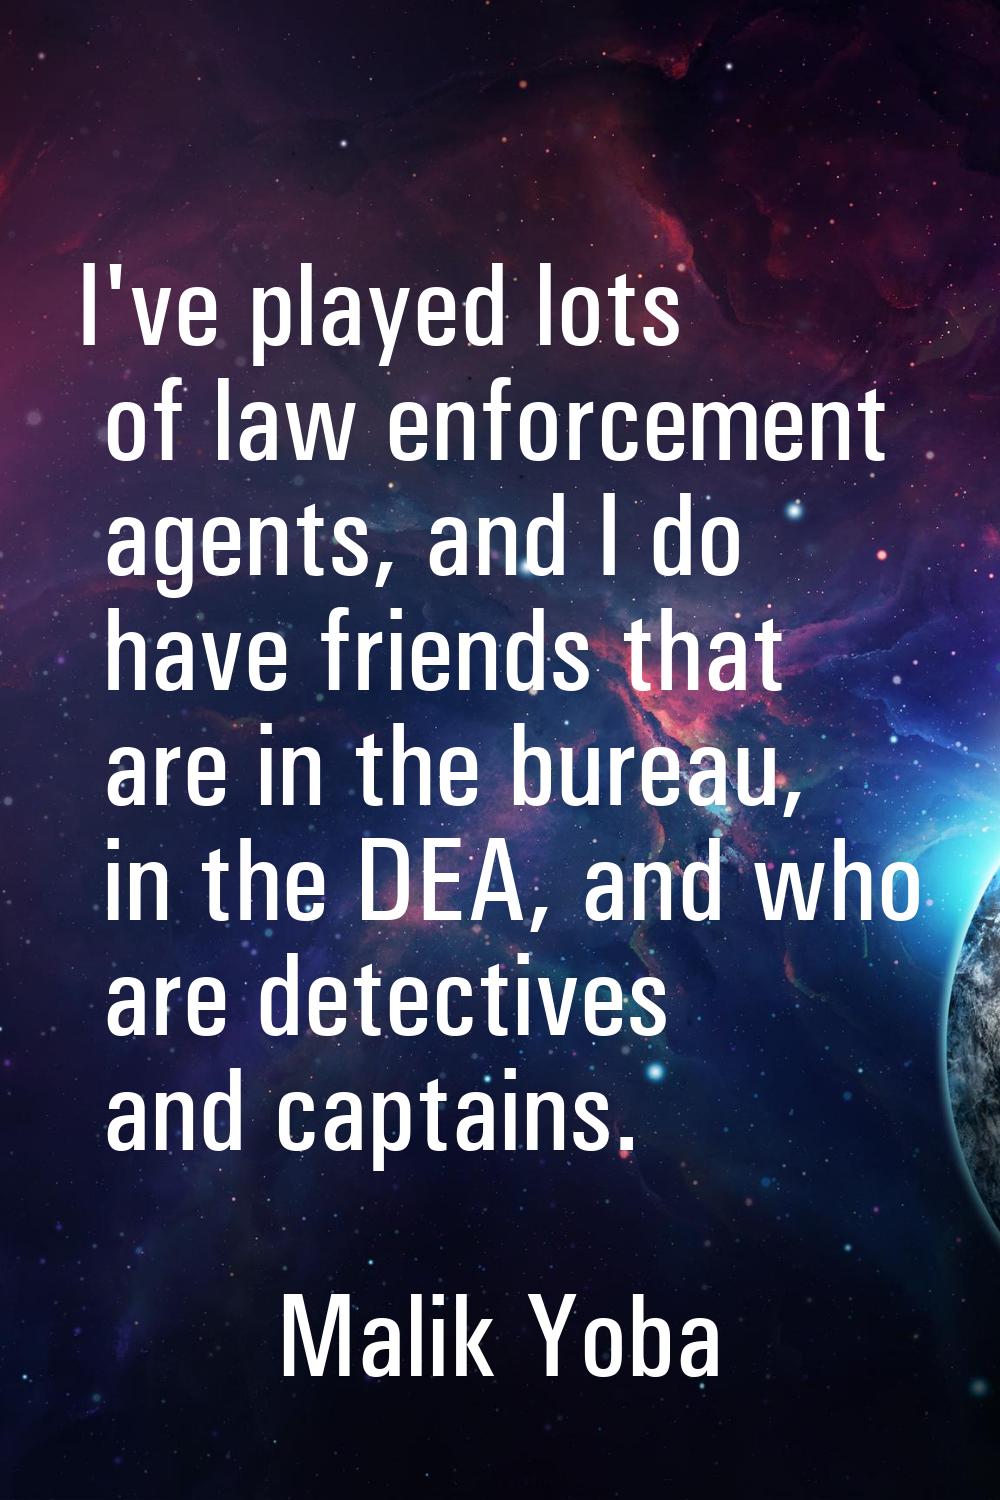 I've played lots of law enforcement agents, and I do have friends that are in the bureau, in the DE